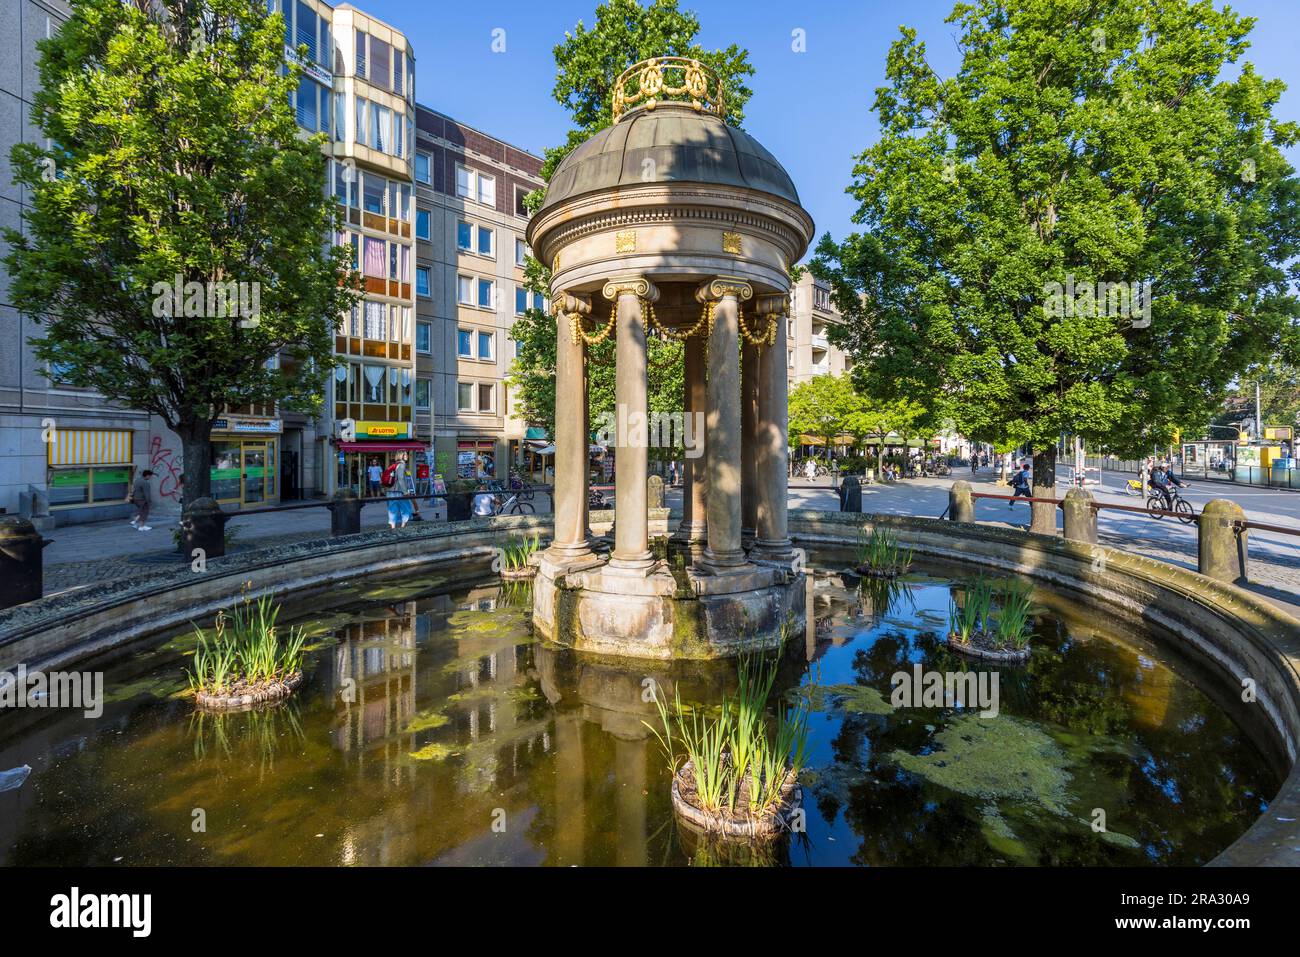 Artesian well at the Albertplatz in Dresden. This is where the citizens of Dresden used to get their coffee water. Dresden, Germany Stock Photo